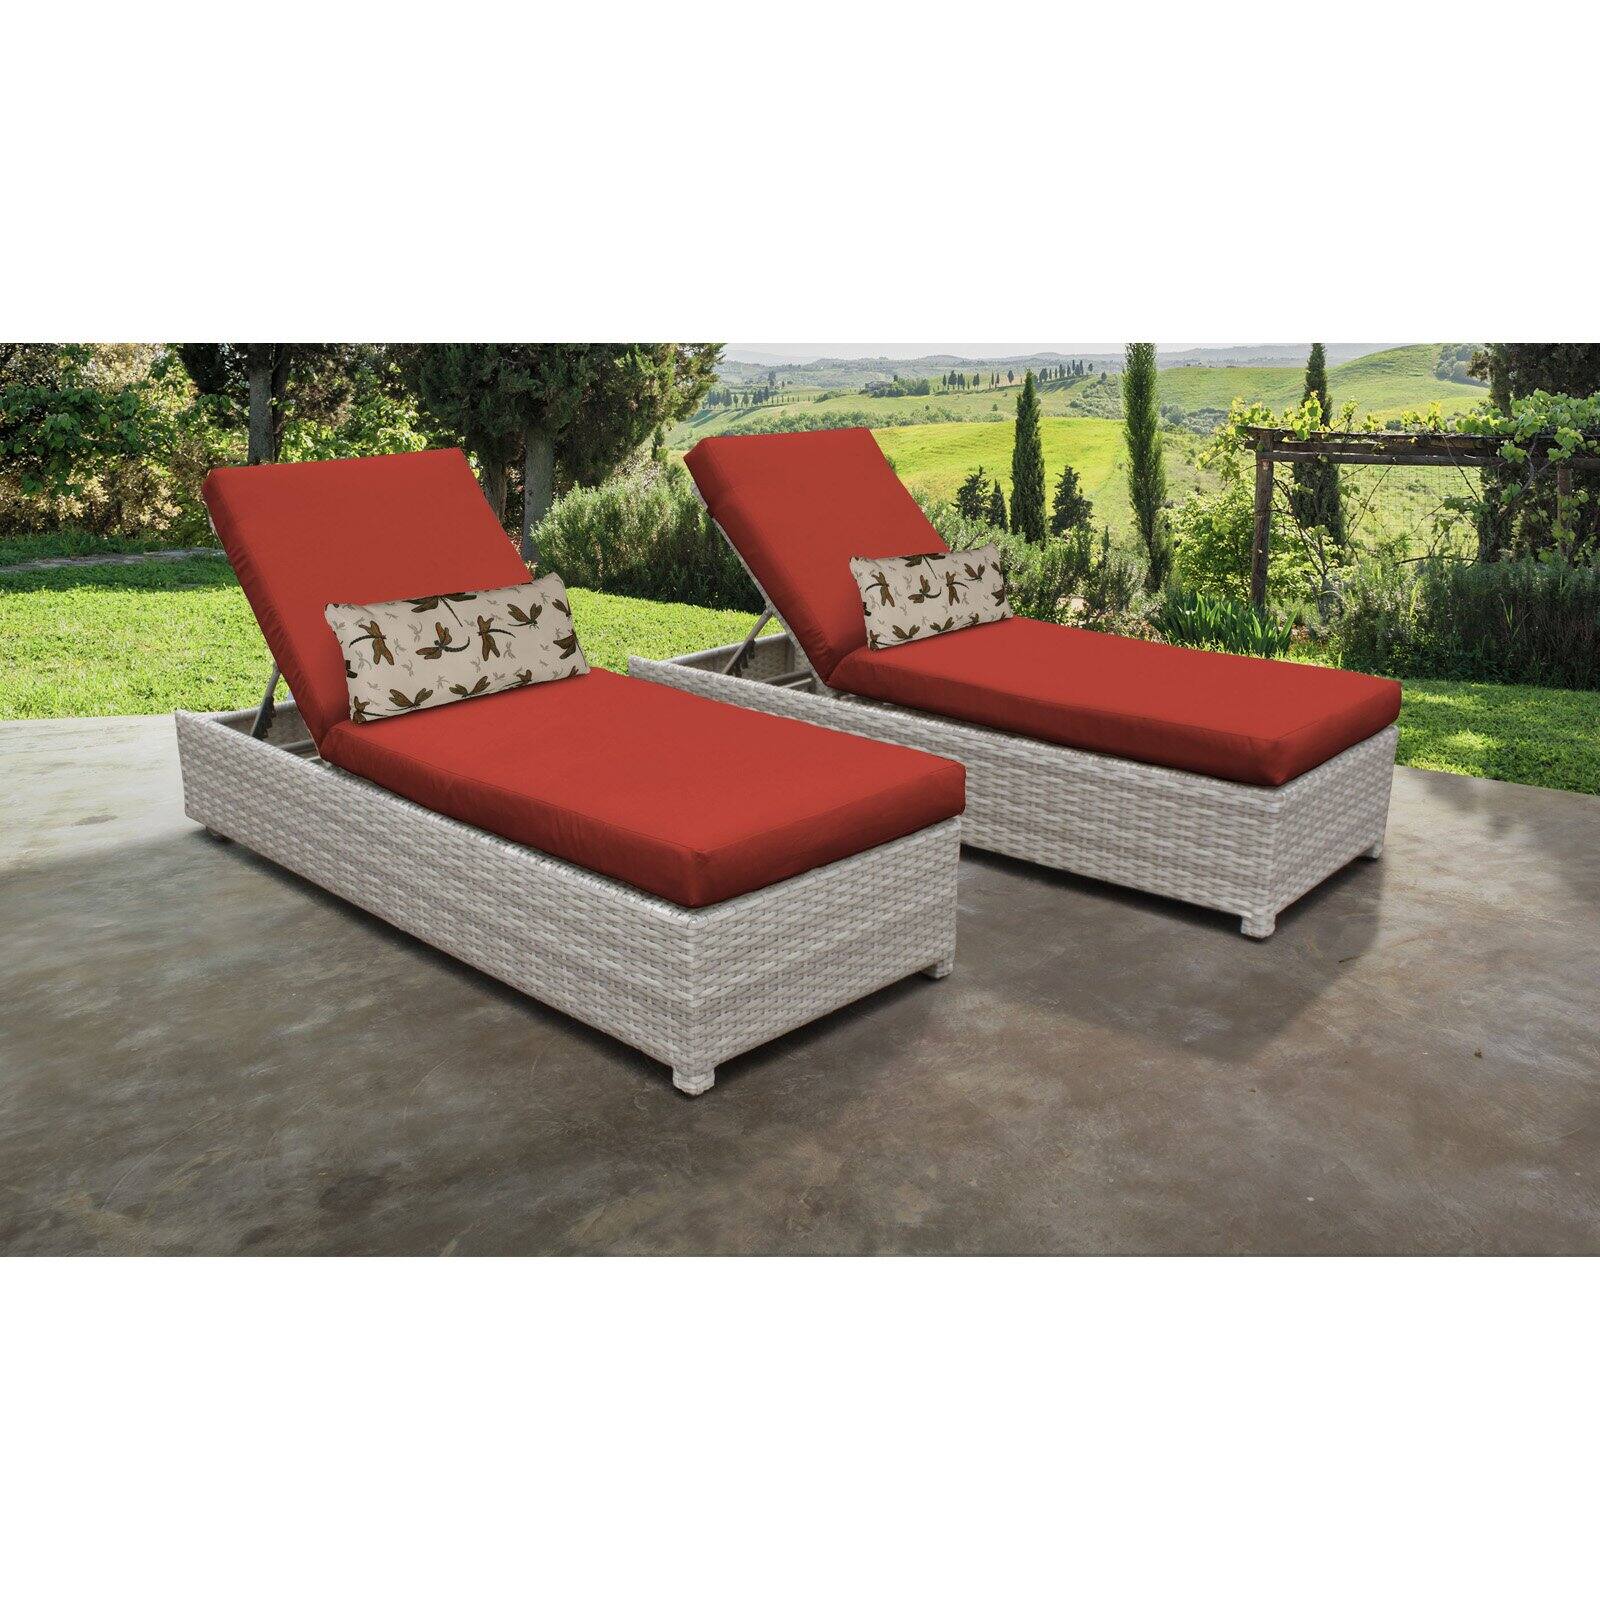 TK Classics Fairmont Wheeled Wicker Outdoor Chaise Lounge Chair - Set of 2 - image 4 of 11